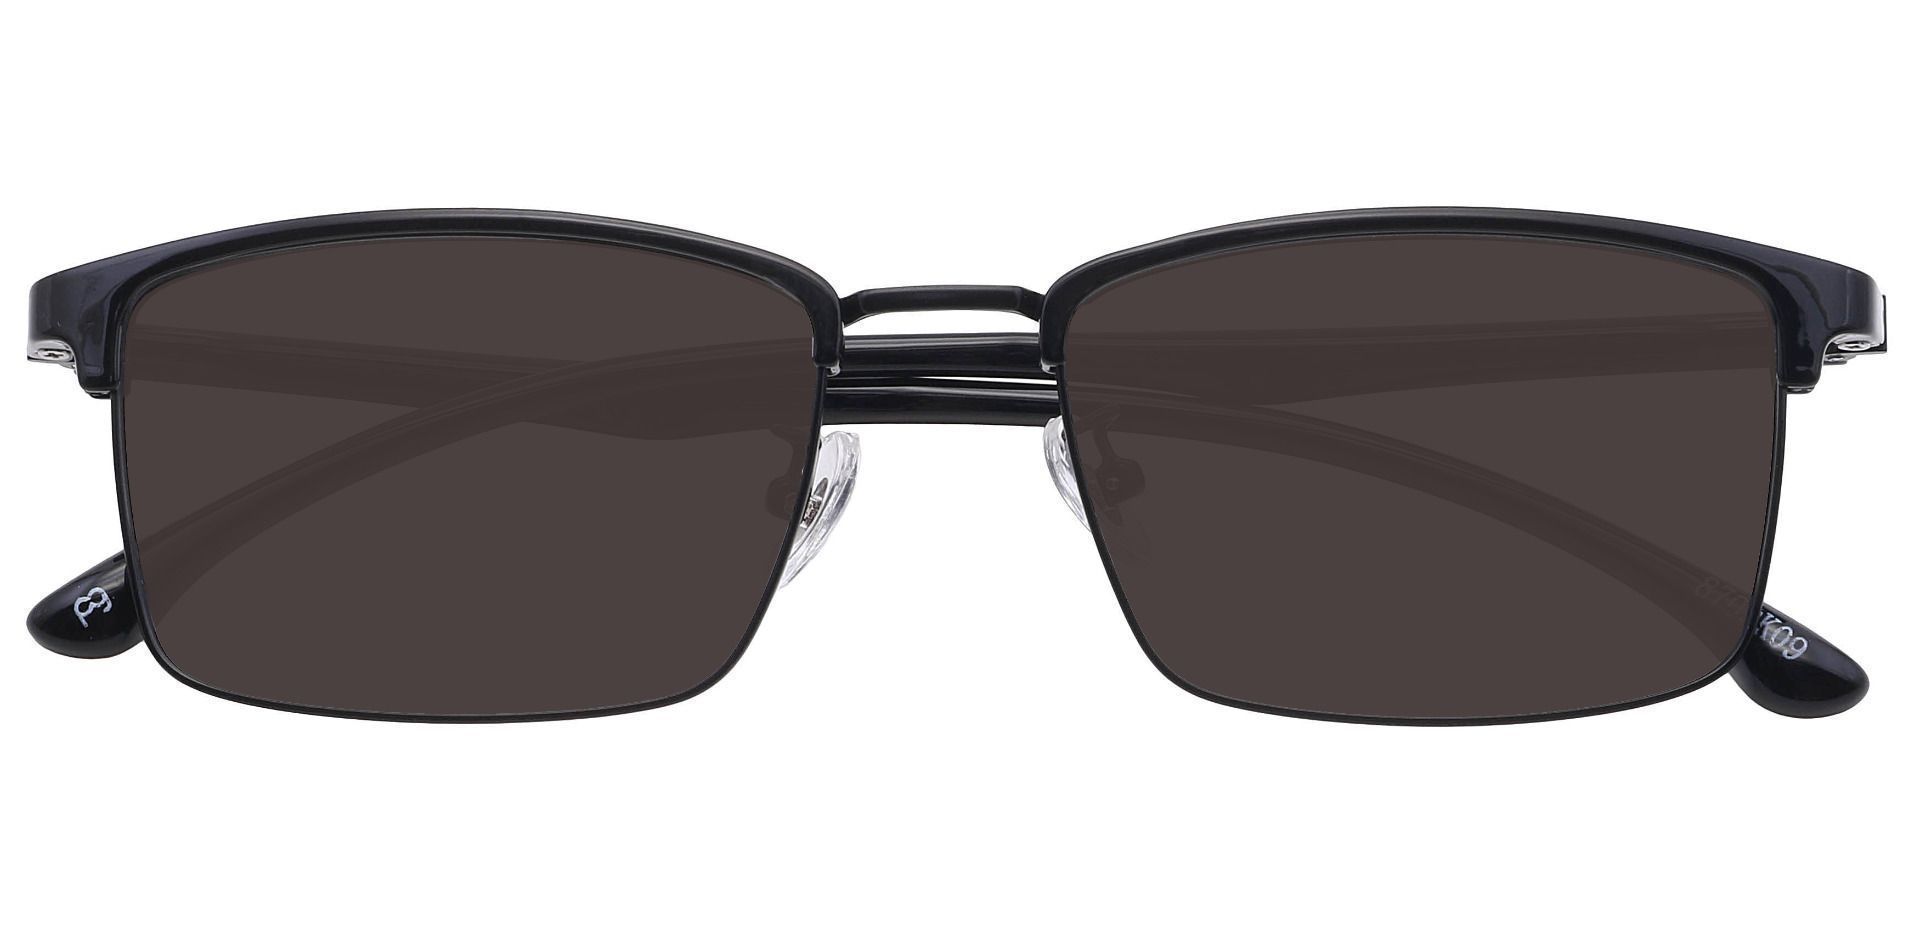 Young Browline Reading Sunglasses - Black Frame With Gray Lenses